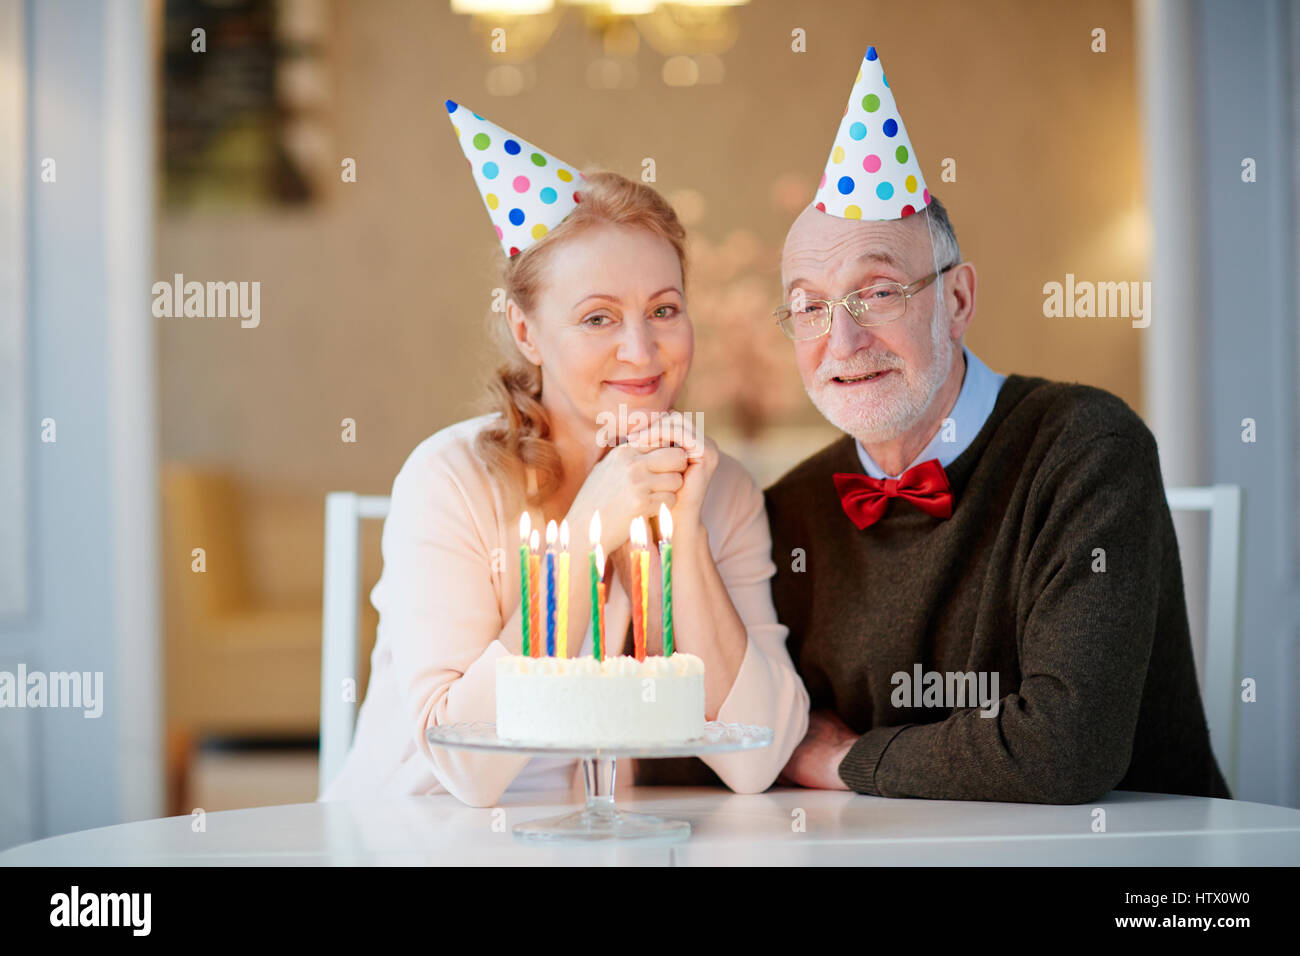 Portrait of loving senior couple celebrating birthday together sitting at table with cake and wearing party hats smiling and  looking at camera Stock Photo